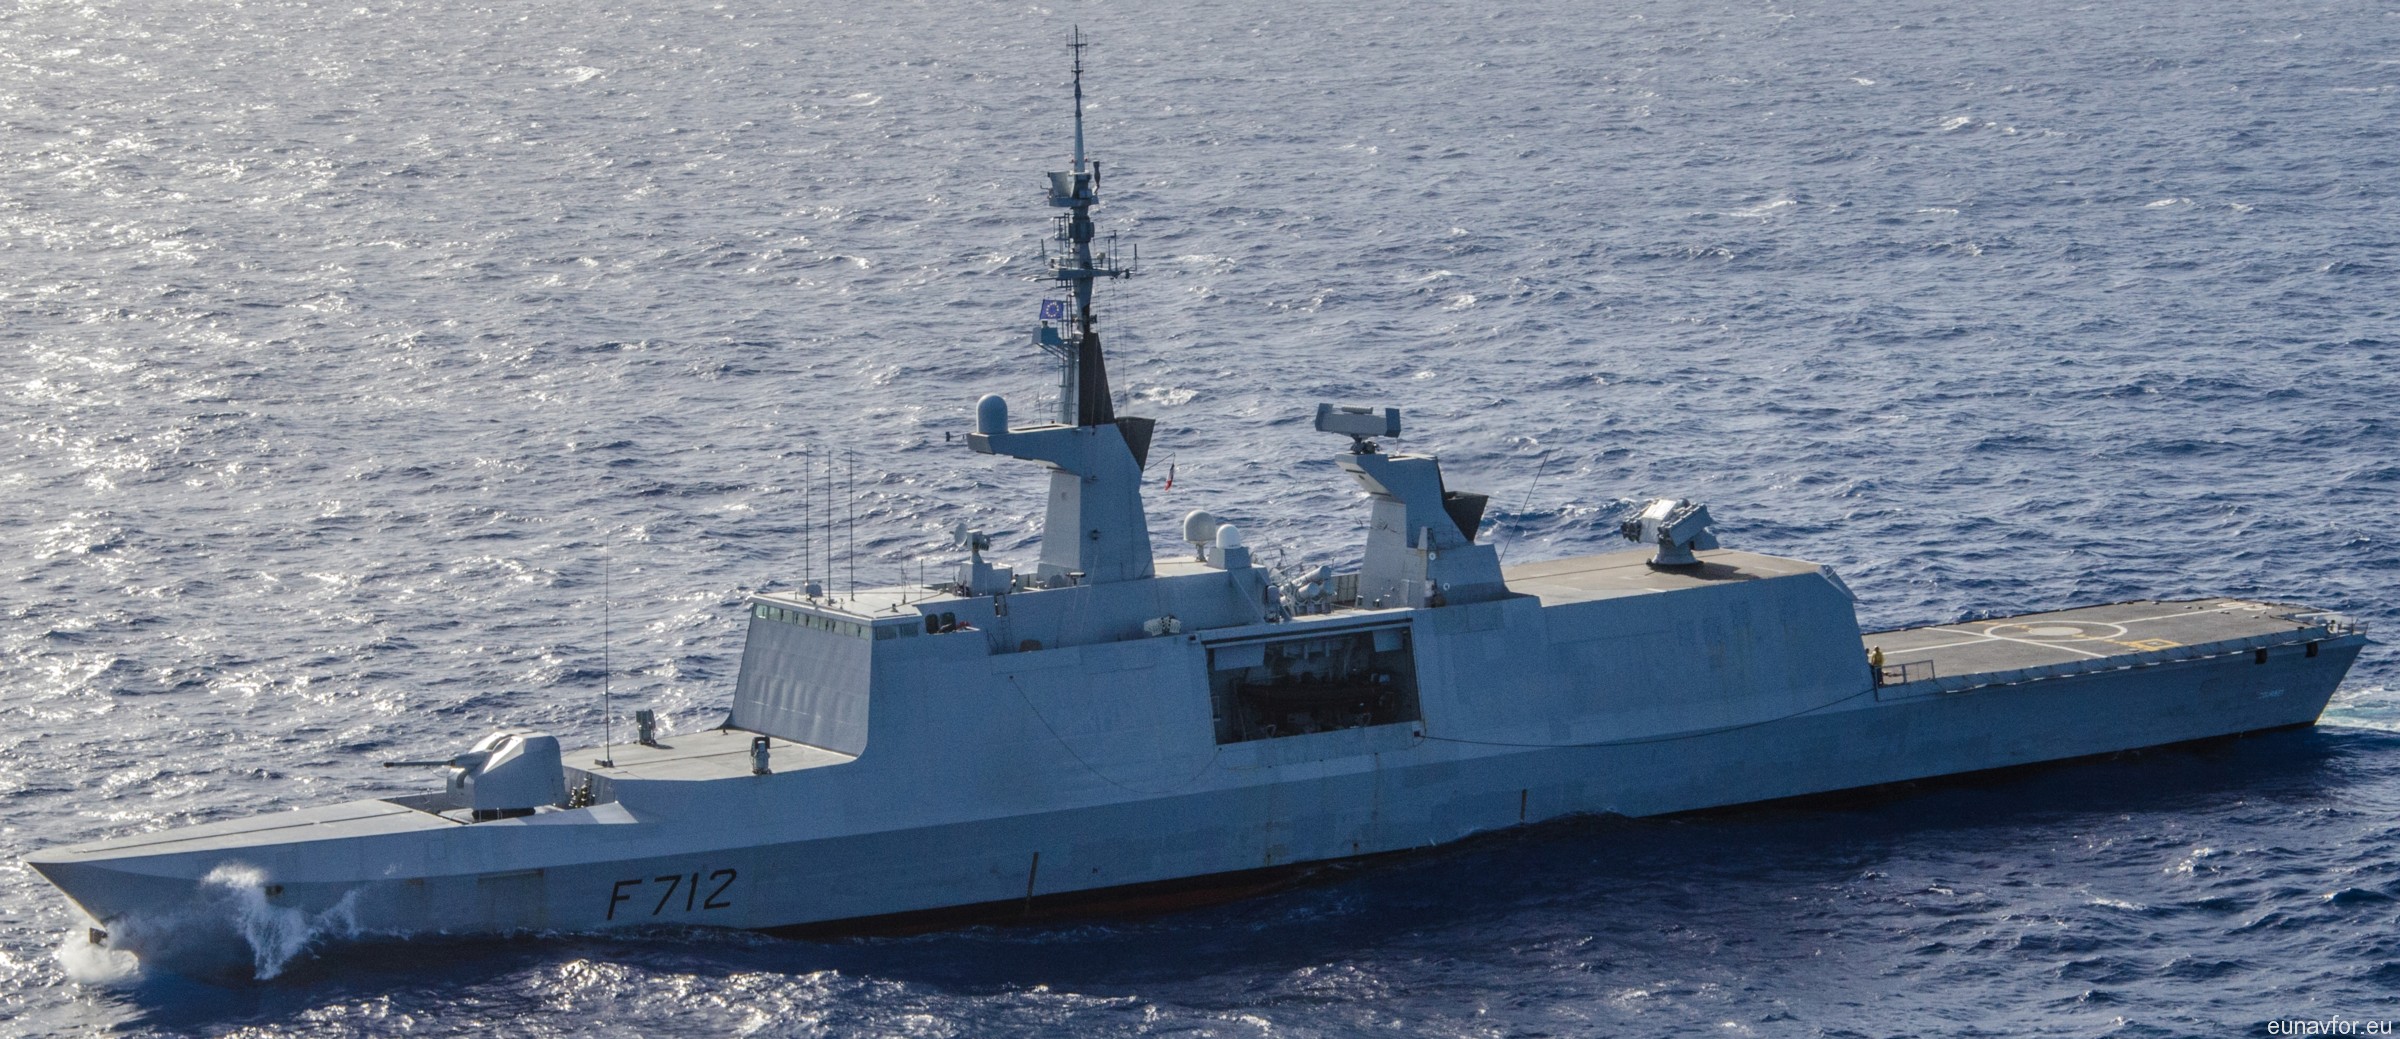 f-712 fs courbet la fayette class frigate french navy marine nationale stealth 05